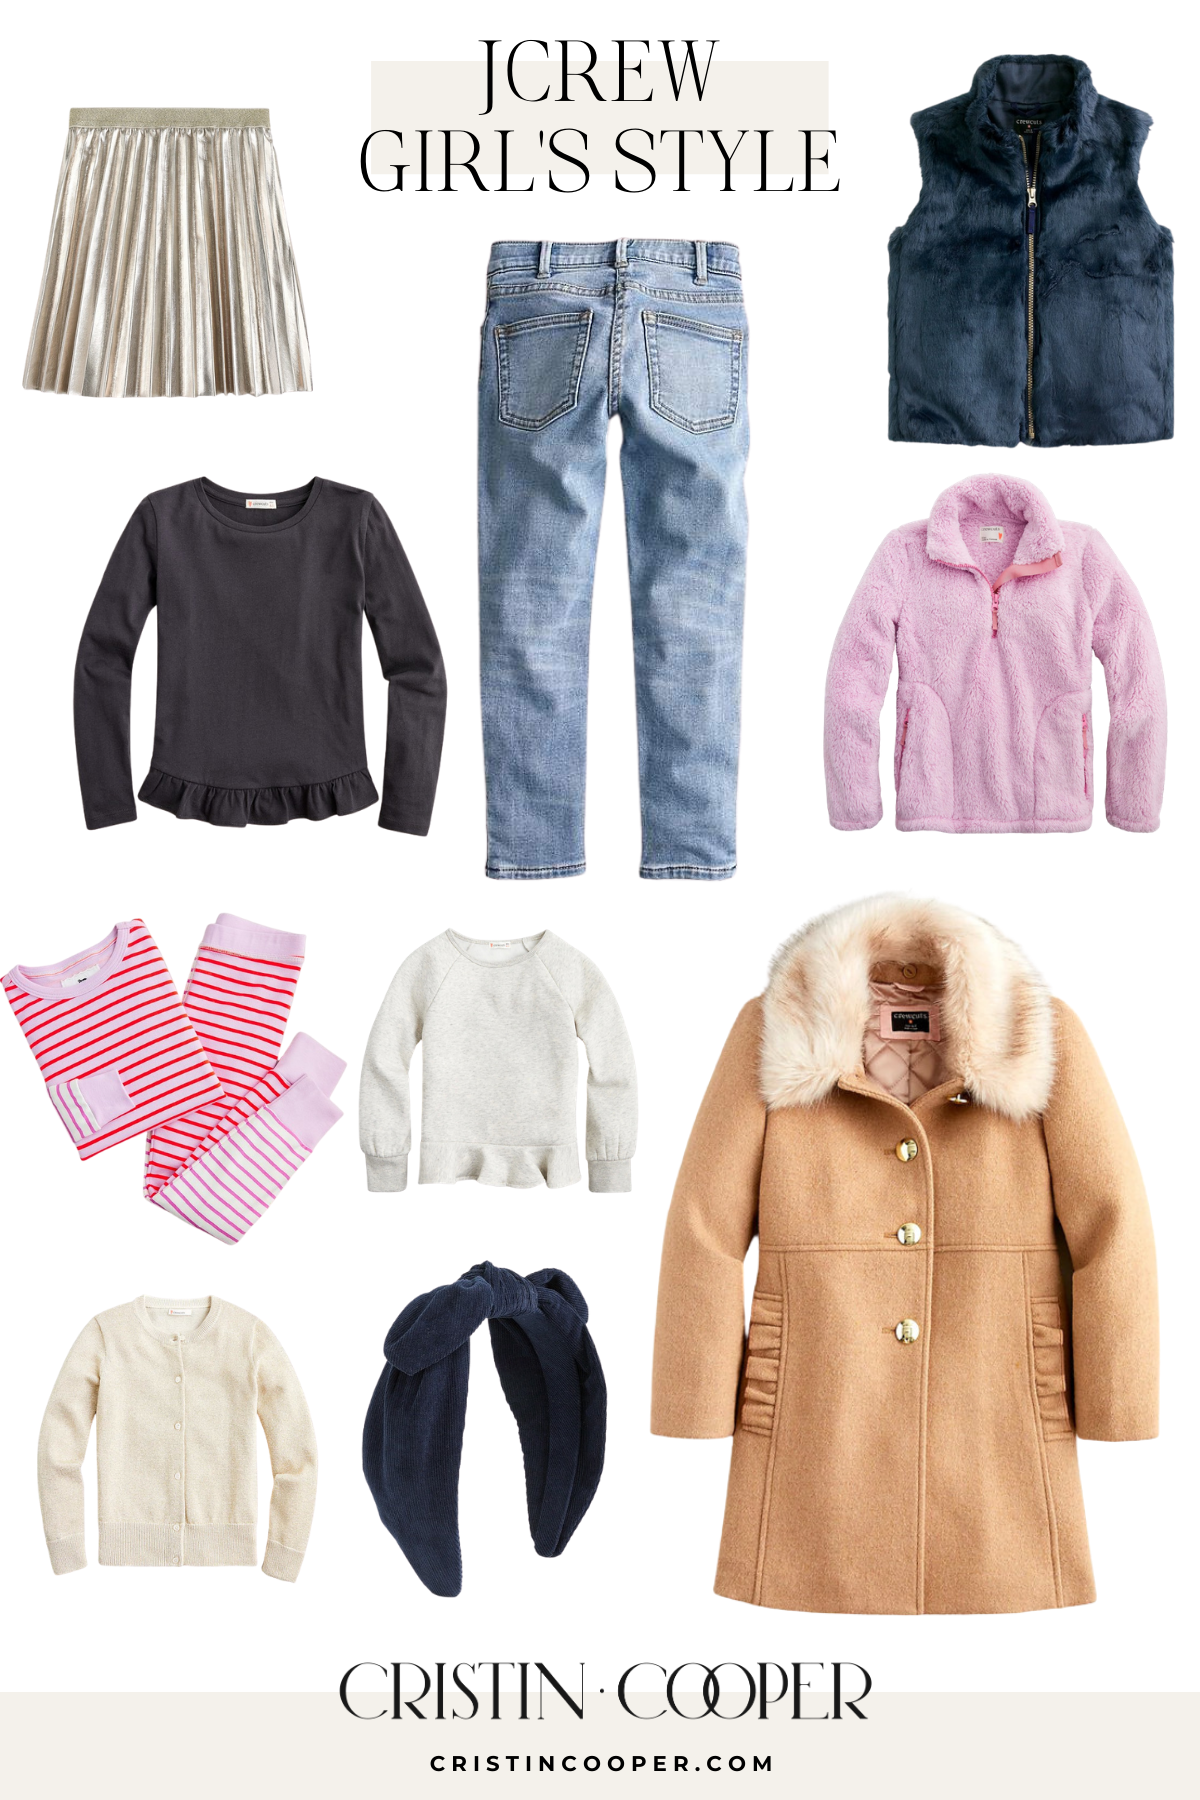 J.Crew Girls Styles for Fall